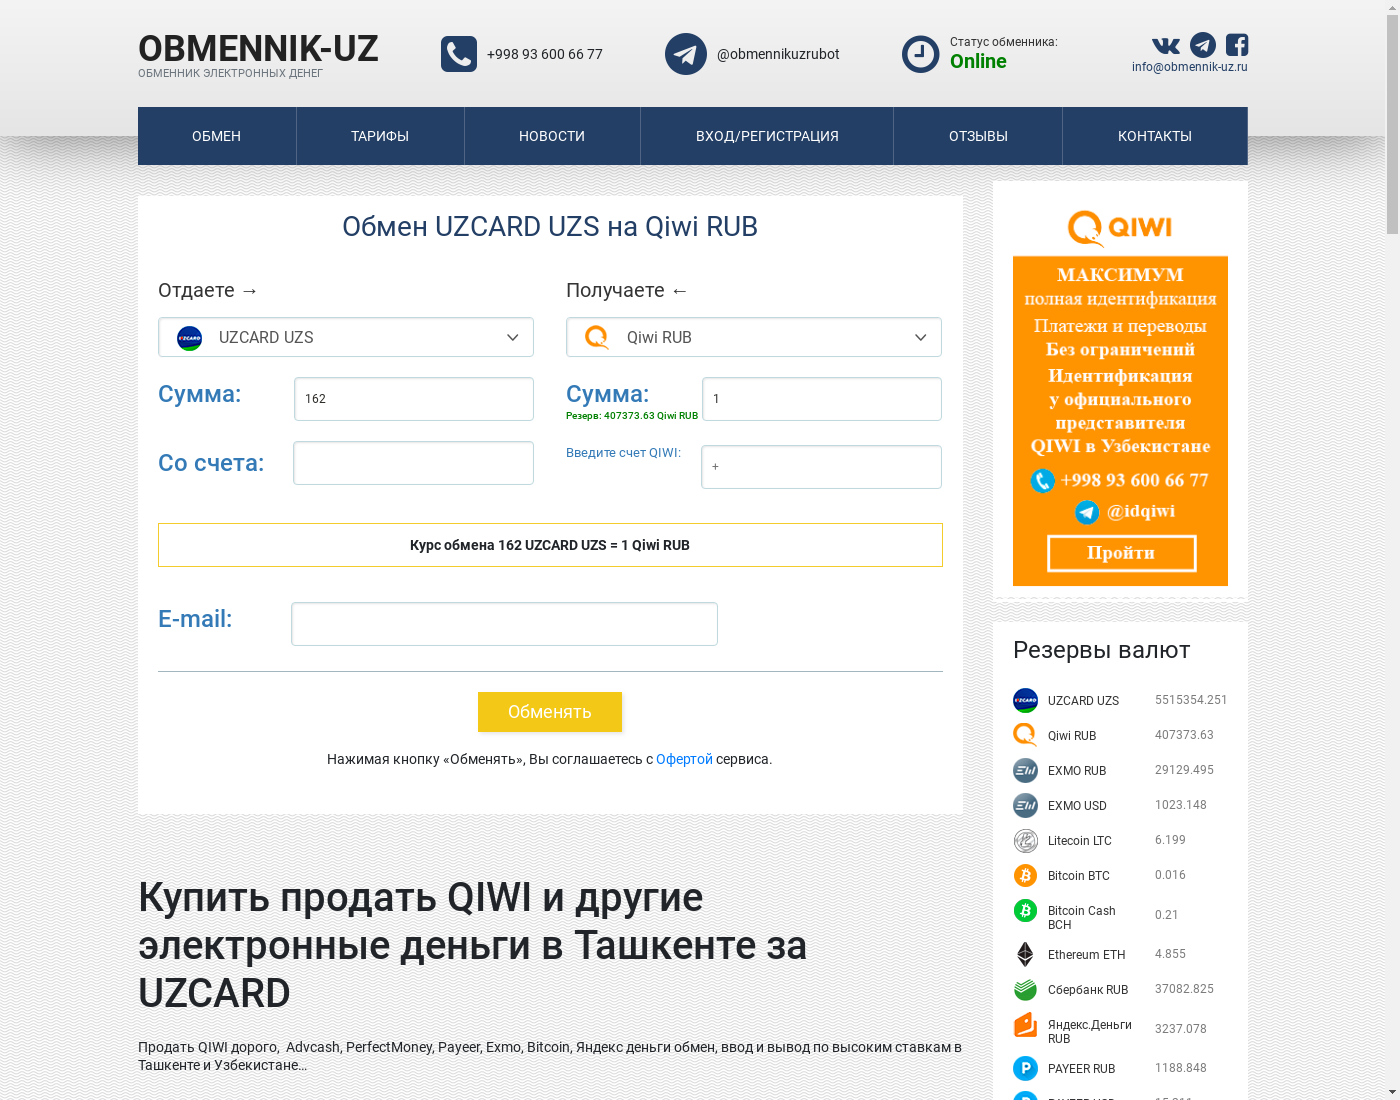 obmennikUZ user interface: the home page in English